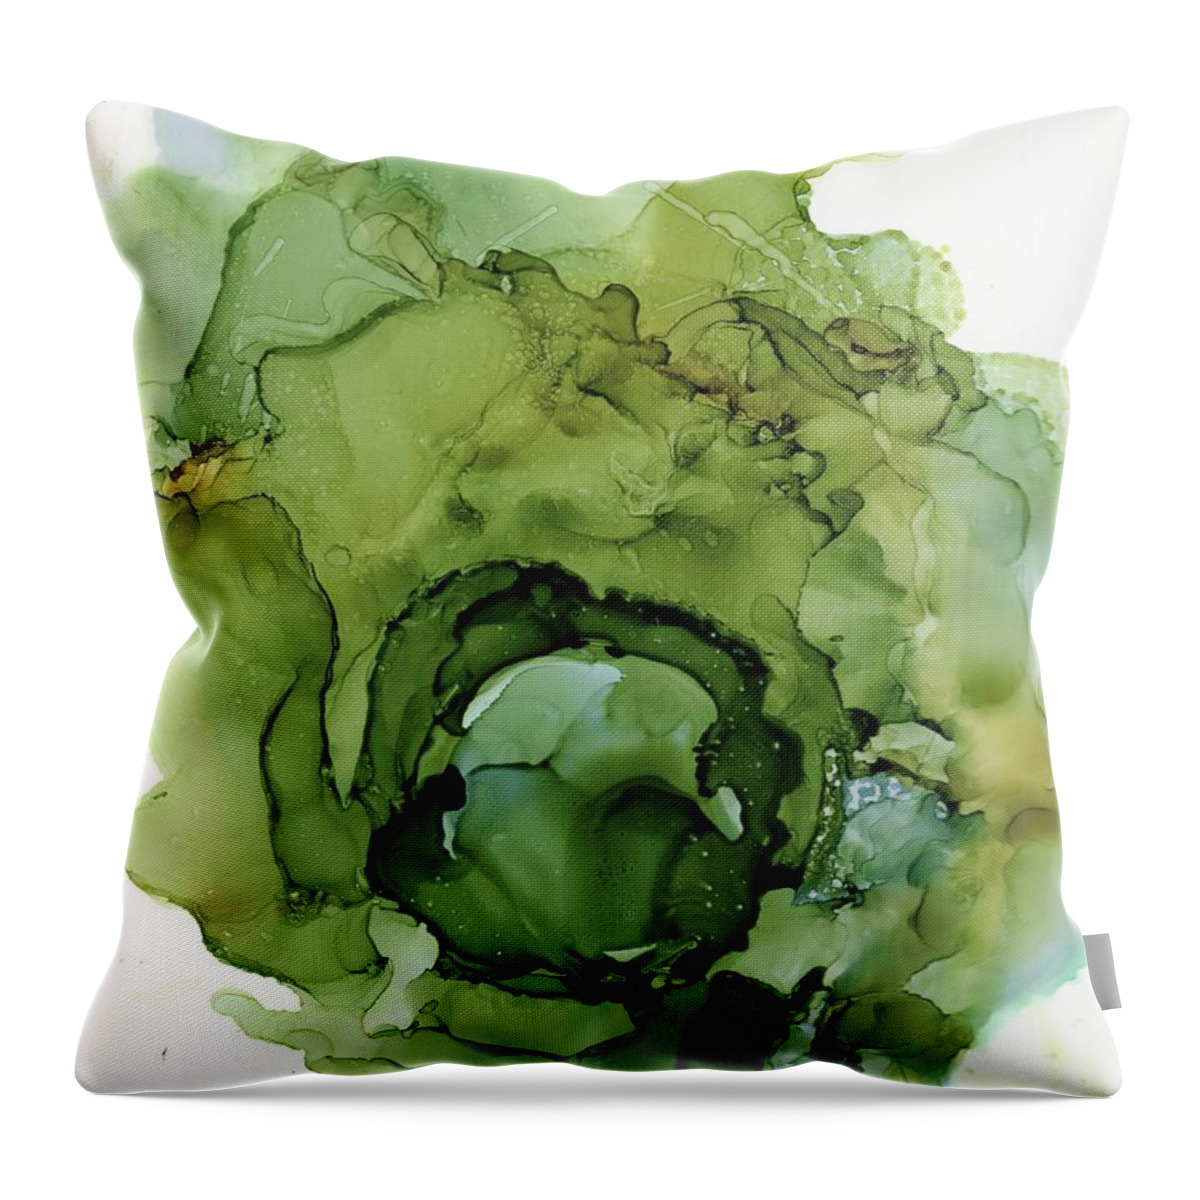 Alcohol Ink Throw Pillow featuring the painting Fragile by Christy Sawyer